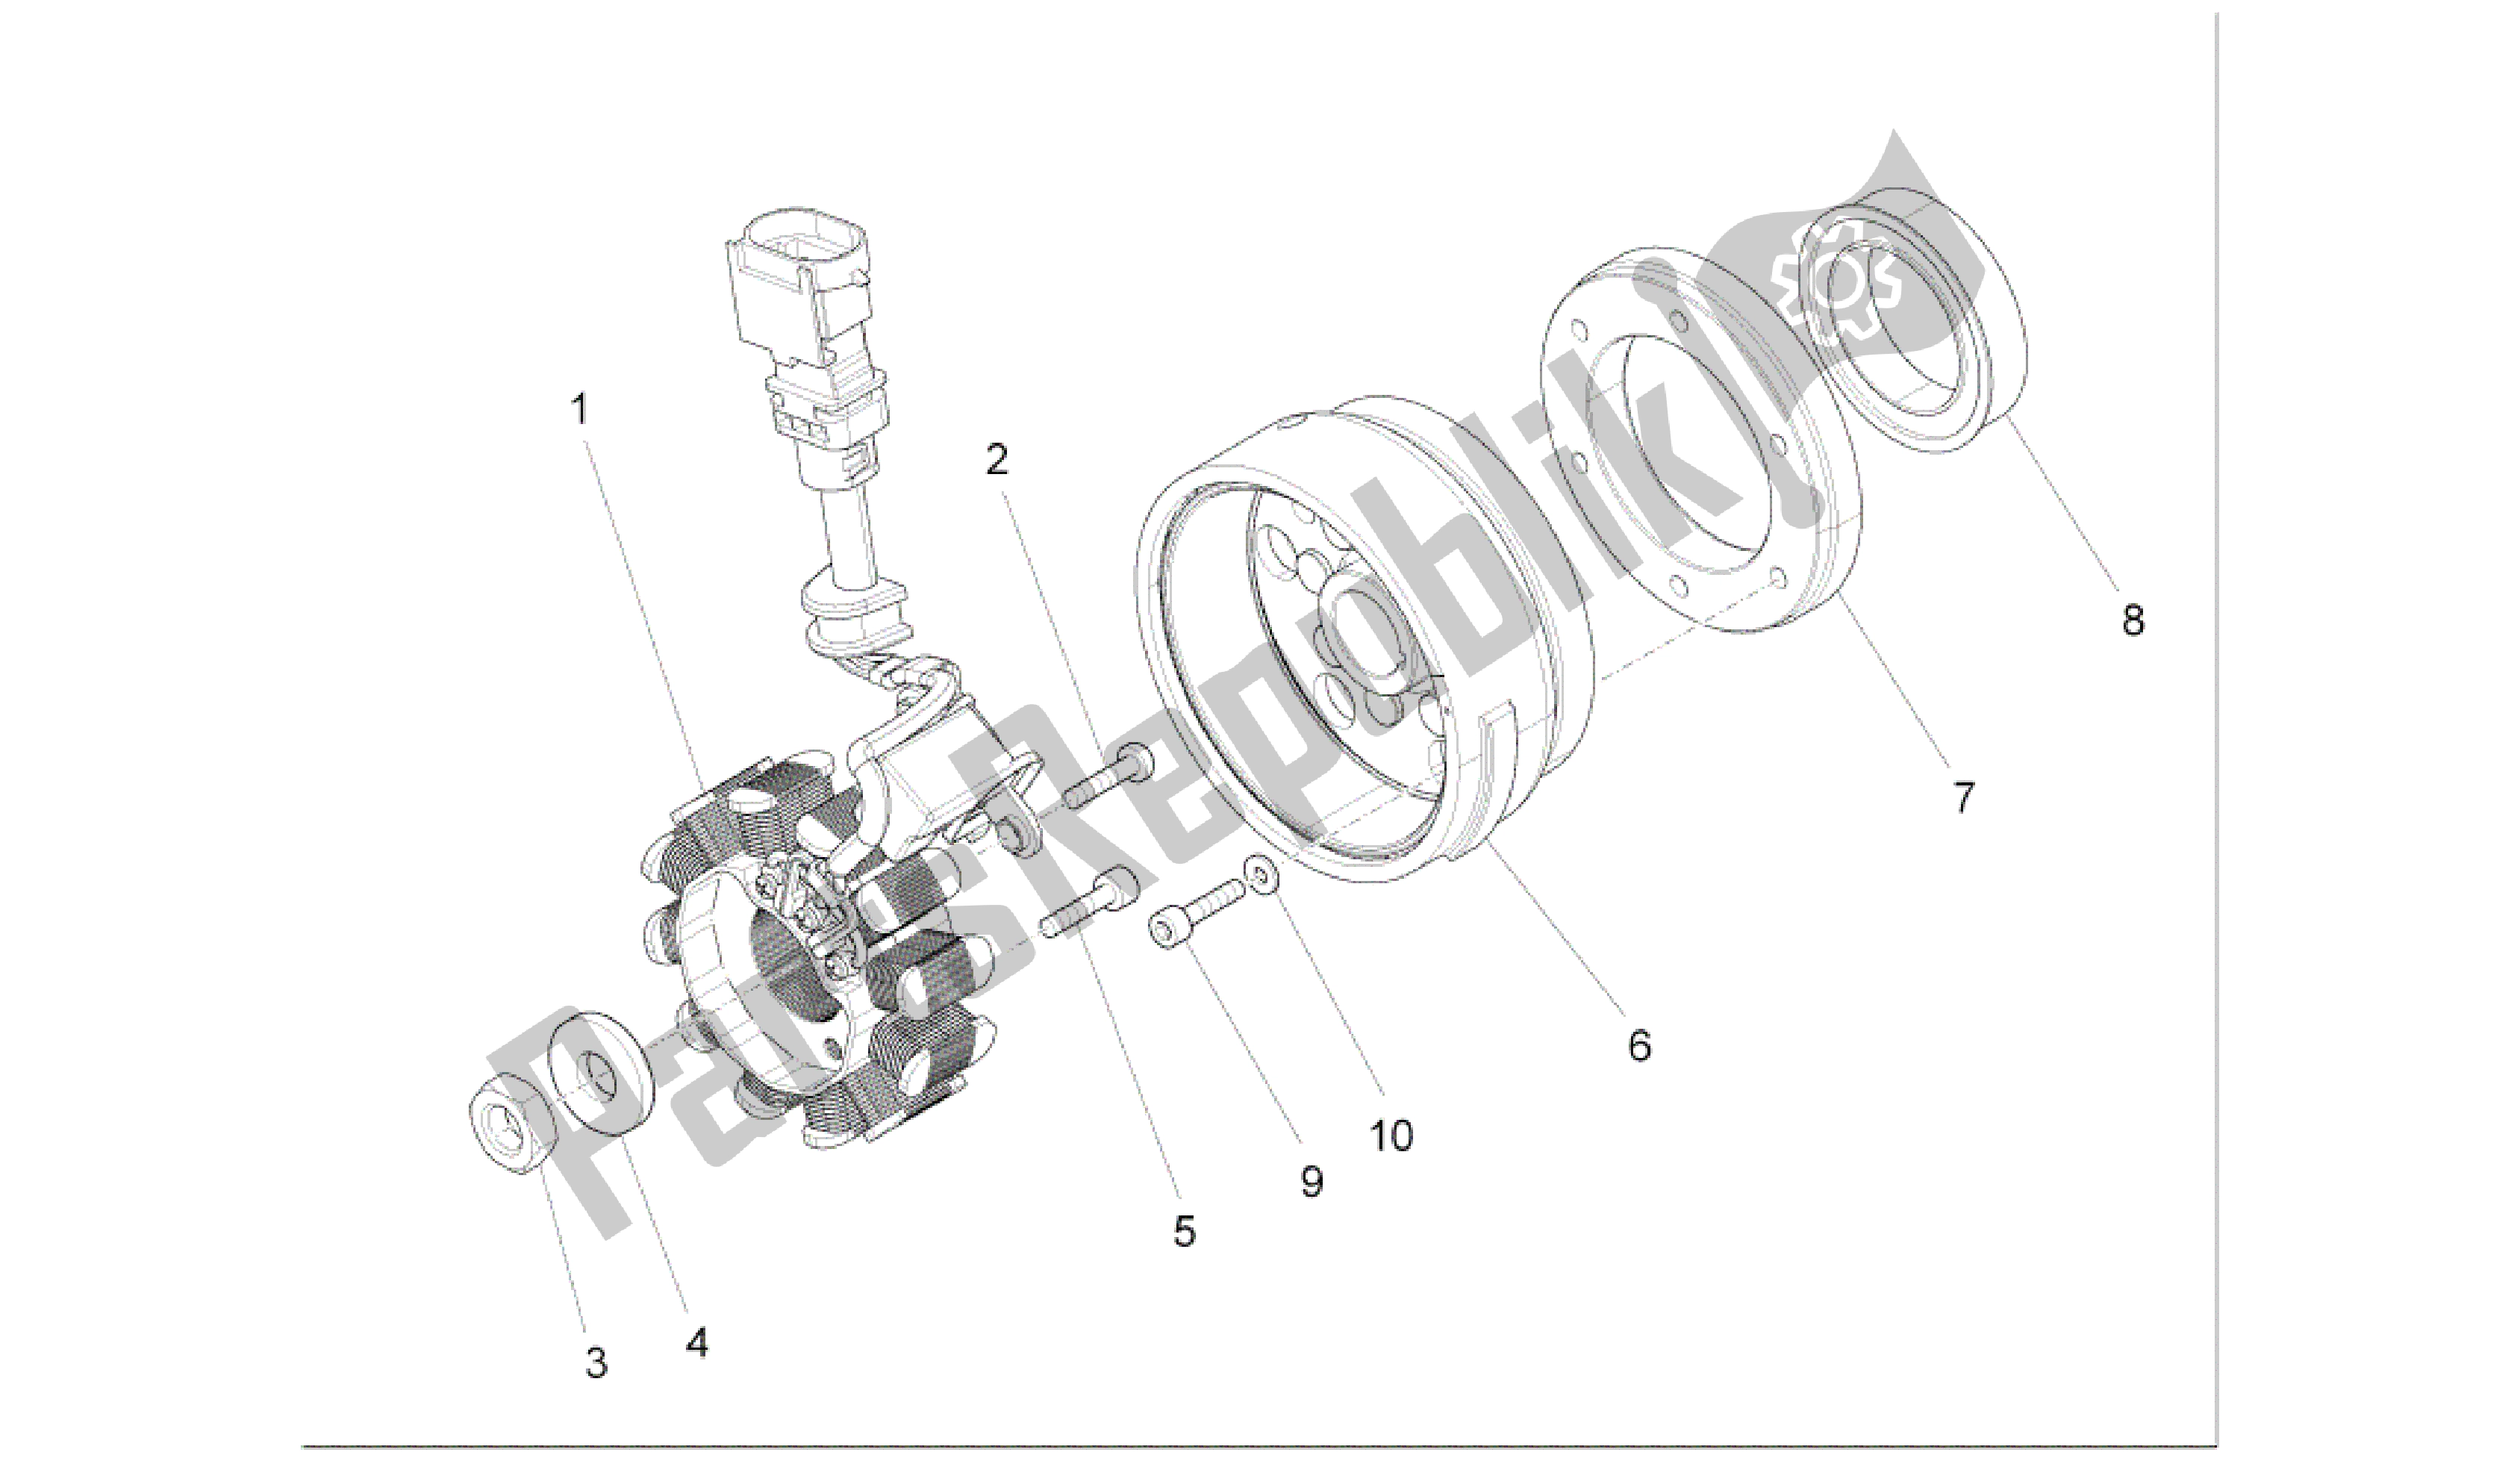 All parts for the Cdi Magneto Assy / Ignition Unit of the Aprilia RS4 125 2011 - 2013